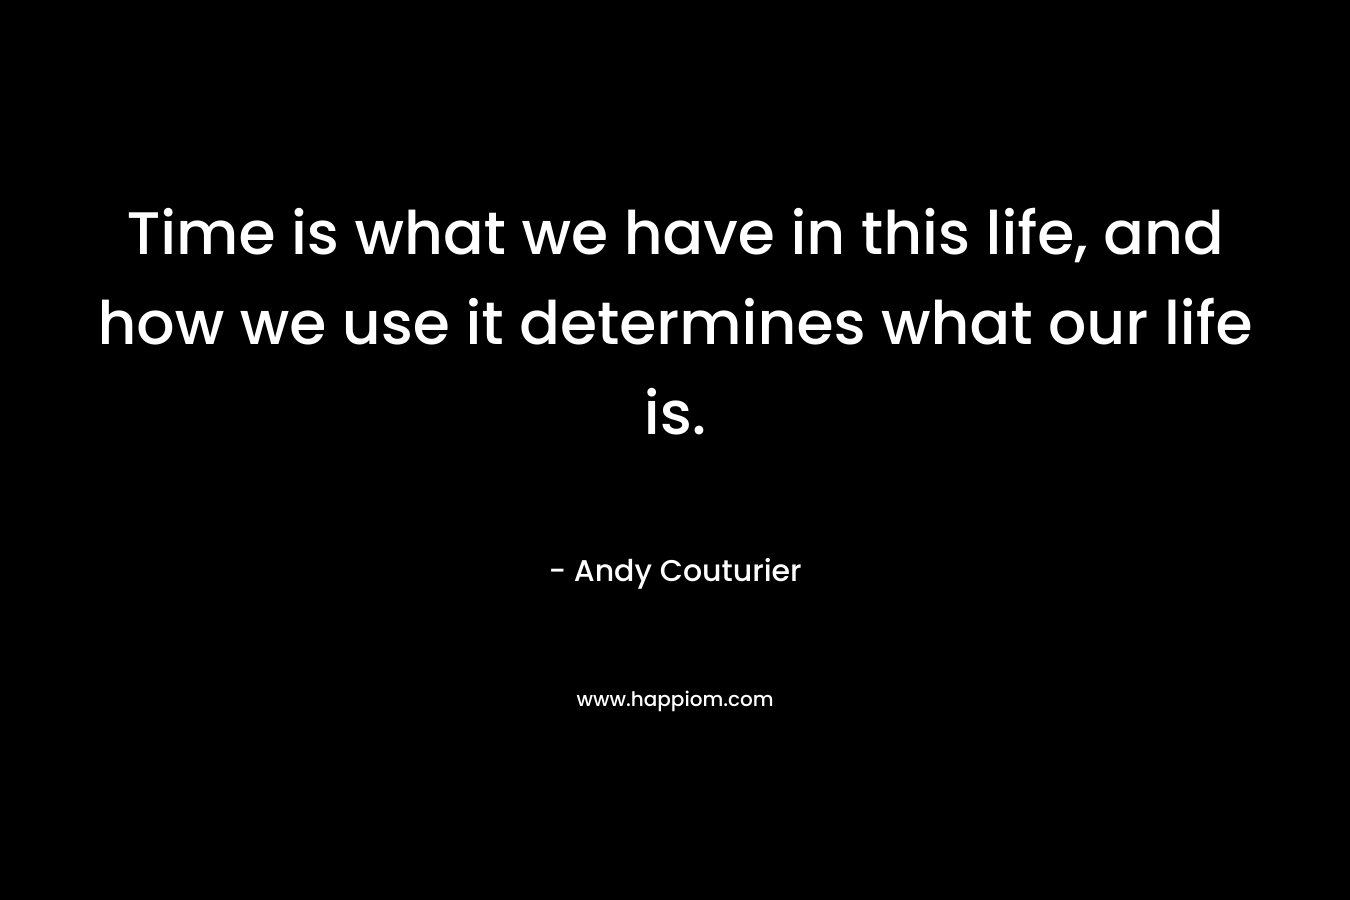 Time is what we have in this life, and how we use it determines what our life is. – Andy Couturier